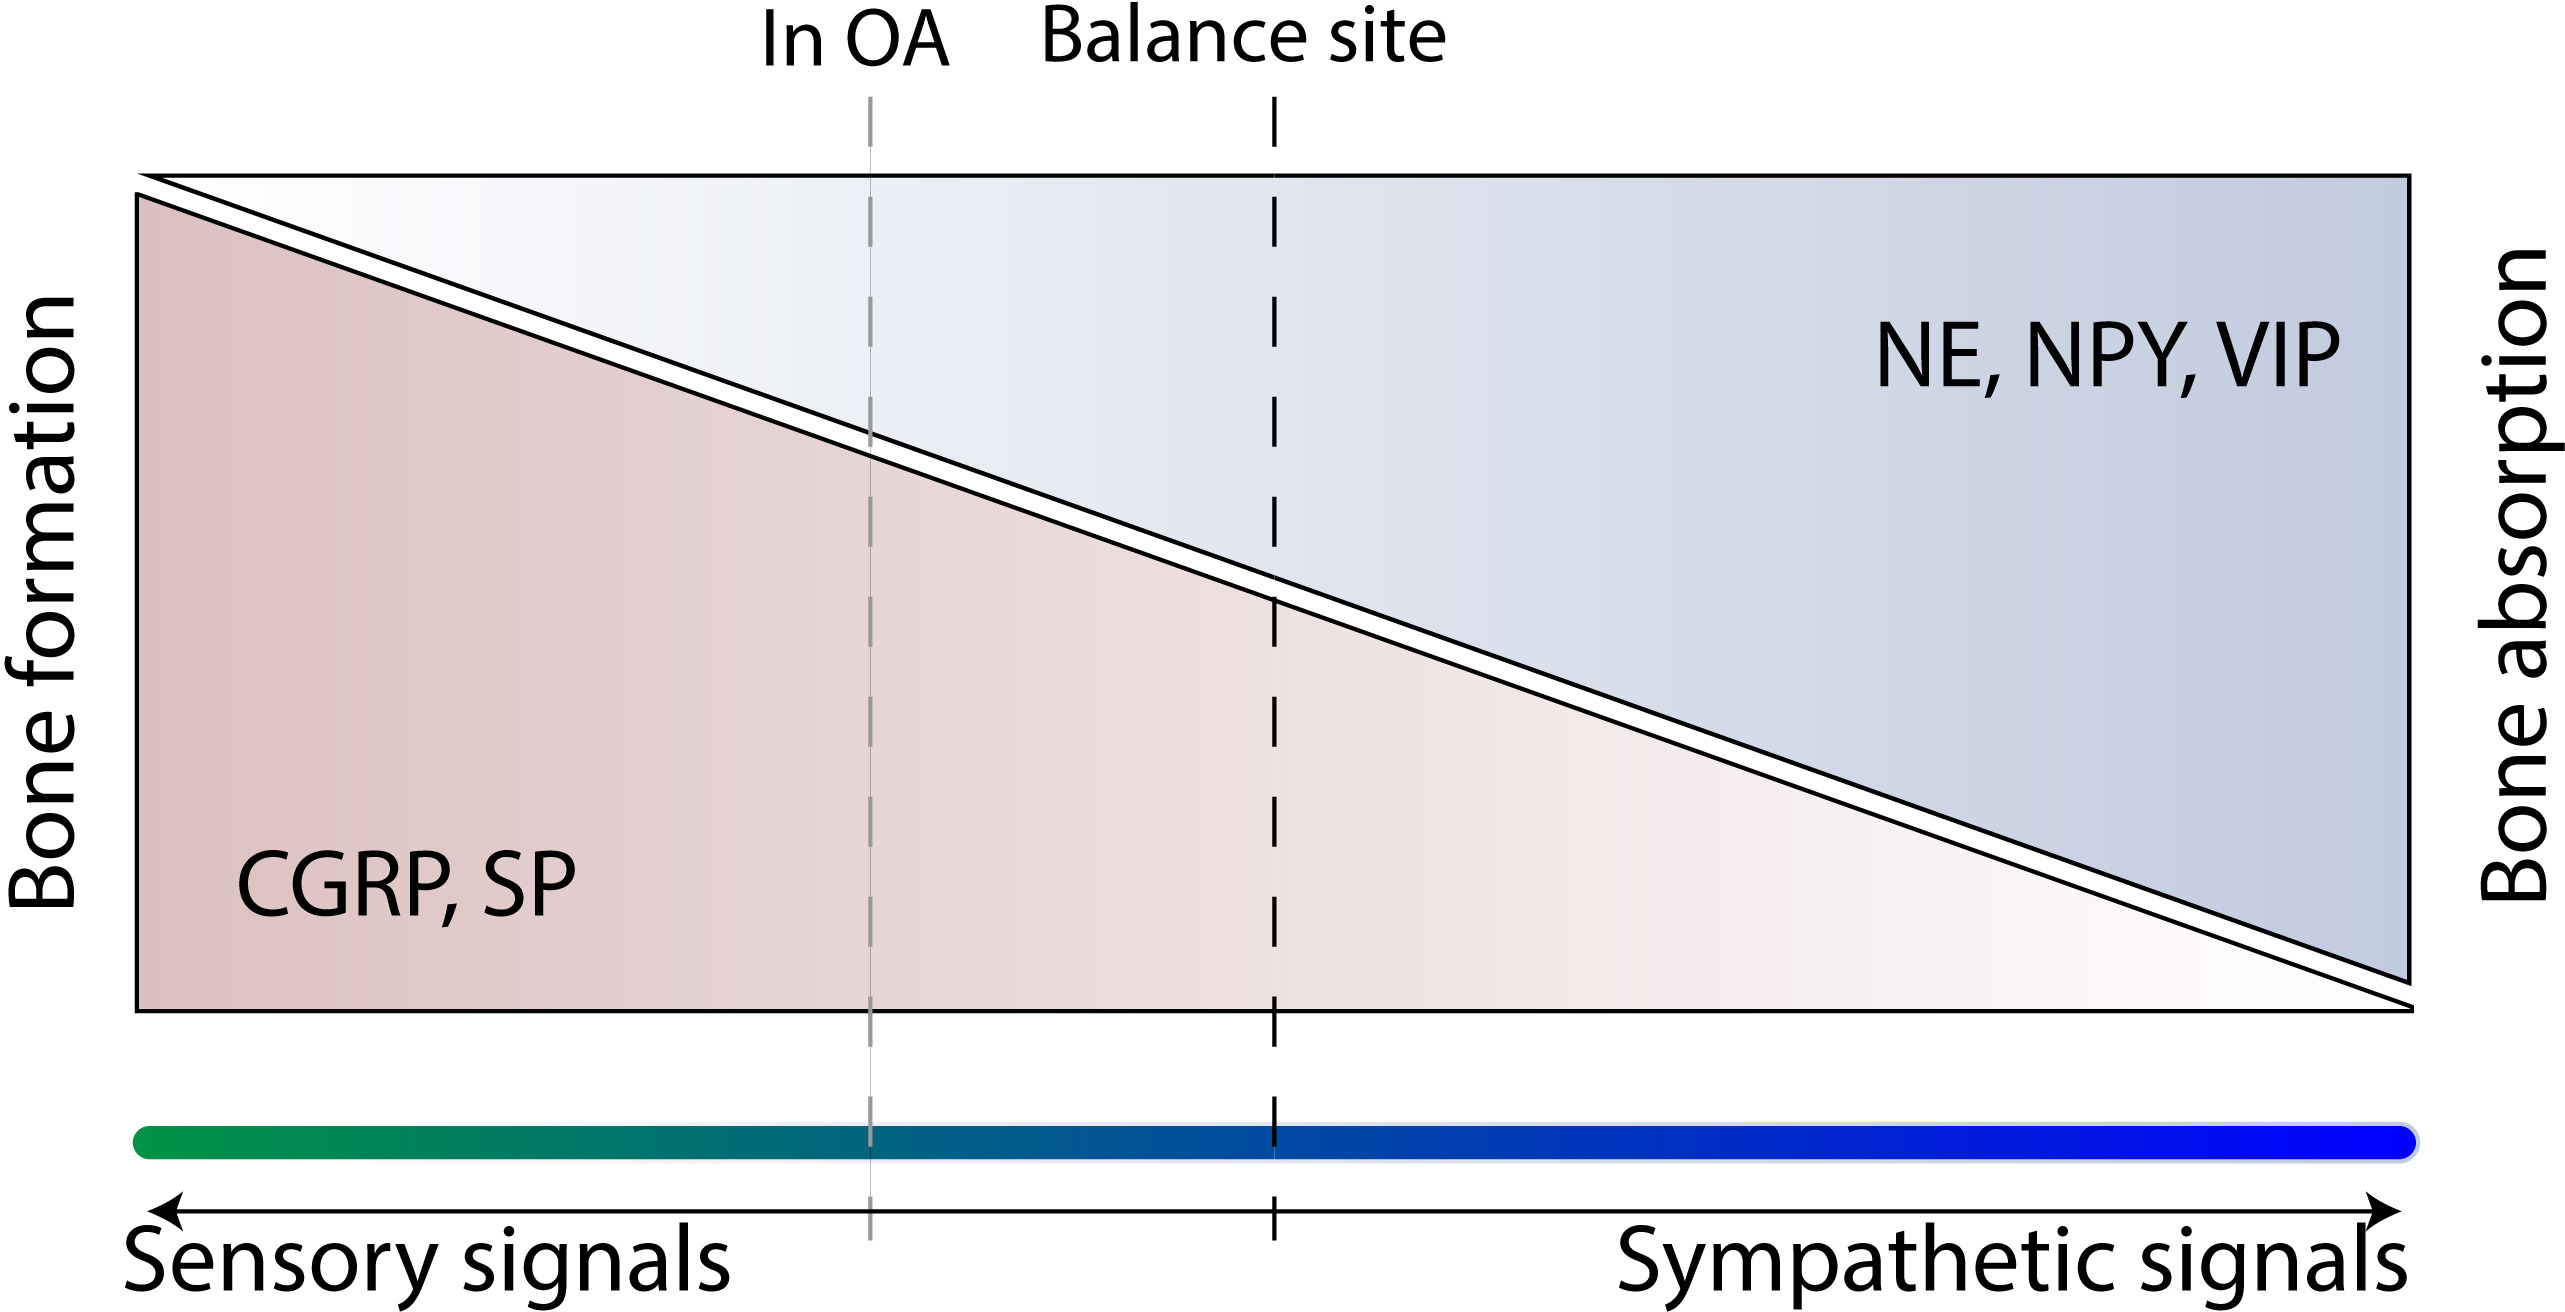 Fig. 4 
            The homeostasis of subchondral bone under the control of the nervous system. The homeostasis of subchondral bone is regulated by peripheral sensory and sympathetic signals. The higher sympathetic tone has a tendency of bone resorption, commonly coupled with increased production of neuropeptide such as norepinephrine (NE), neuropeptide Y (NPY), and vasoactiveintestinal polypeptide (VIP). In contrast, activation of sensory nerves leads to bone formation with production of neuropeptide, such as calcitonin gene-related peptide (CGRP) and substance P (SP). In normal conditions, the intensity between sensory signals and sympathetic signals are maintained in balance (the normal condition, black dash line). In osteoarthritis (OA), the balance is disrupted, and predominance of signals shifts from higher sympathetic nerve to sensory nerve during OA progression, coupled with deterioration of subchondral bone and OA pain. At the end stage, the abnormal balance emerges (the condition that sensory signals exceed the sympathetic signals, grey dash line), consistent with increased bone volume of subchondral bone.
          